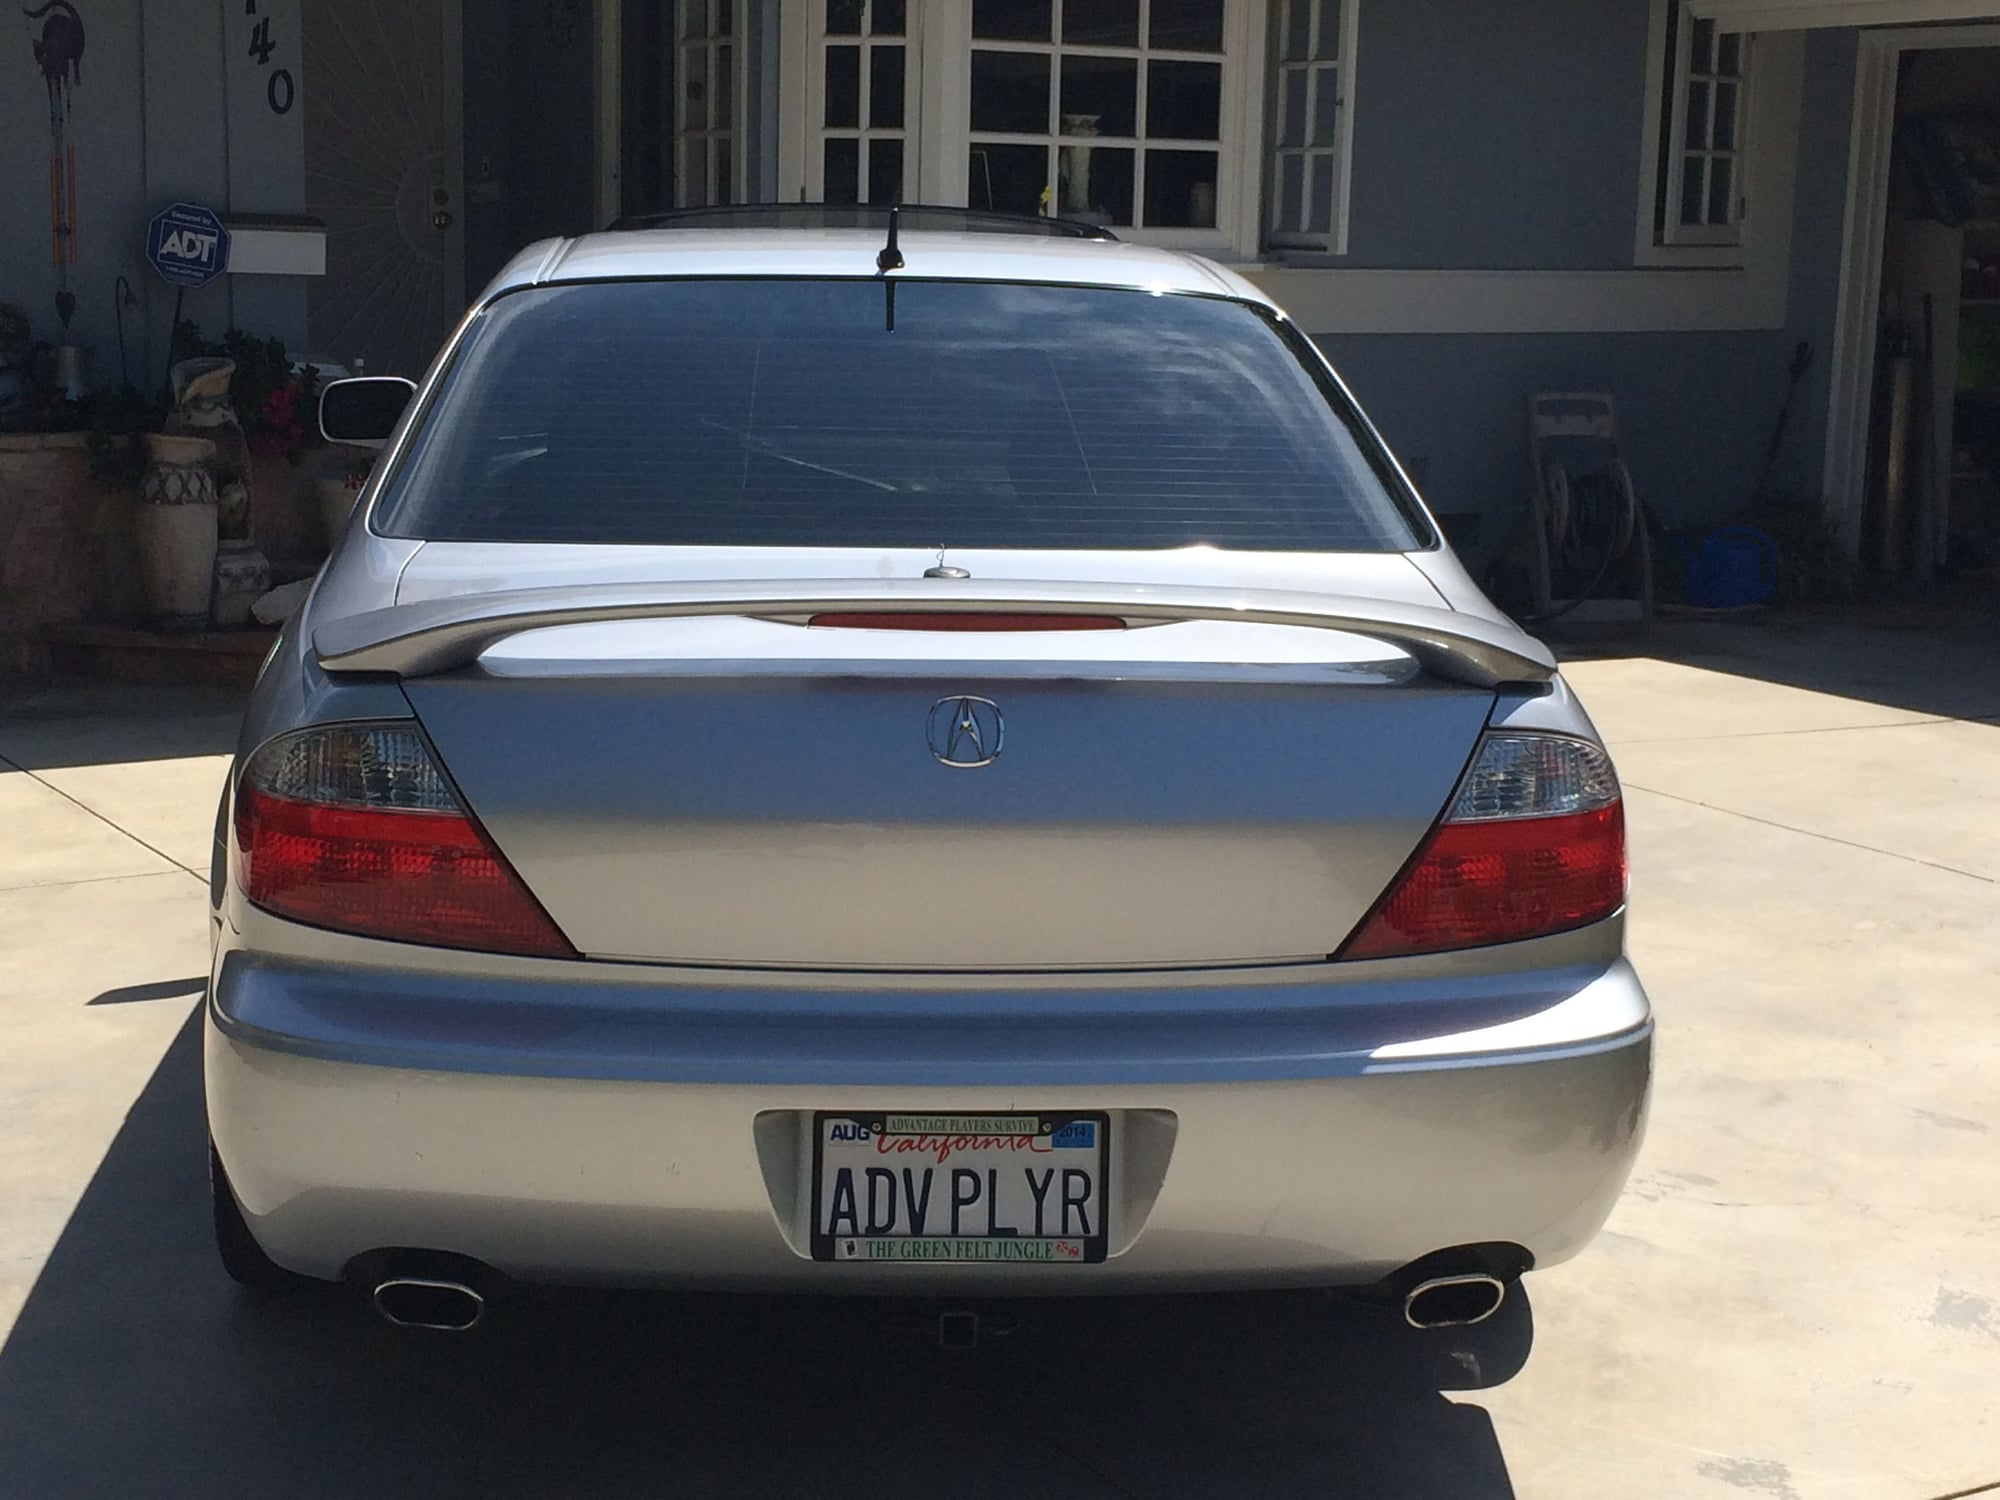 2003 Acura CL - FS: Cherry condition 2003 Acura CL Type S with Navi - Used - VIN 1acu32ra123457887 - 145,000 Miles - 6 cyl - 2WD - Automatic - Coupe - Silver - Beaumont, CA 92223, United States